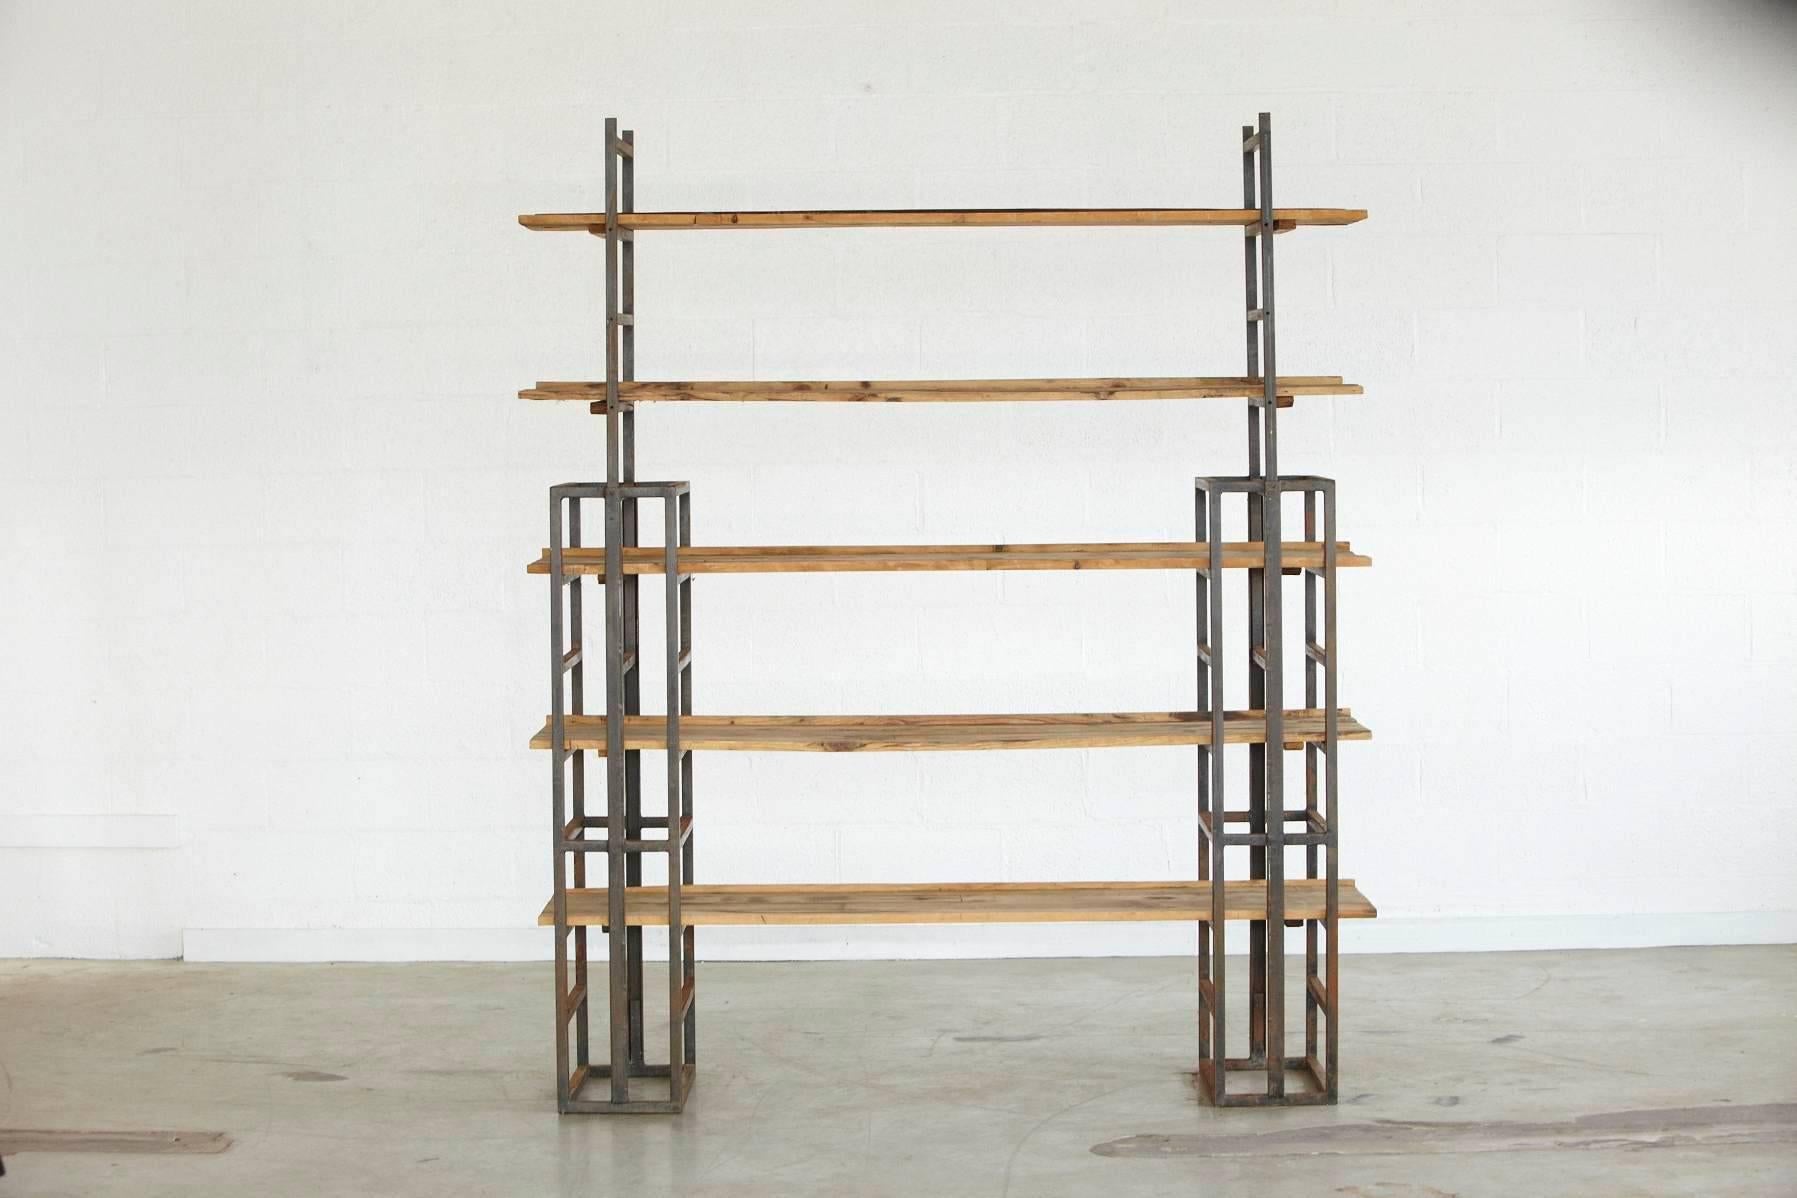 Custom-made Industrial style steel and five-tiered wood plank etagere.
Welded steel construction, height adjustable. Great patina. Sturdy construction.
Dimensions: collapsed H 53.75, fully extended 72